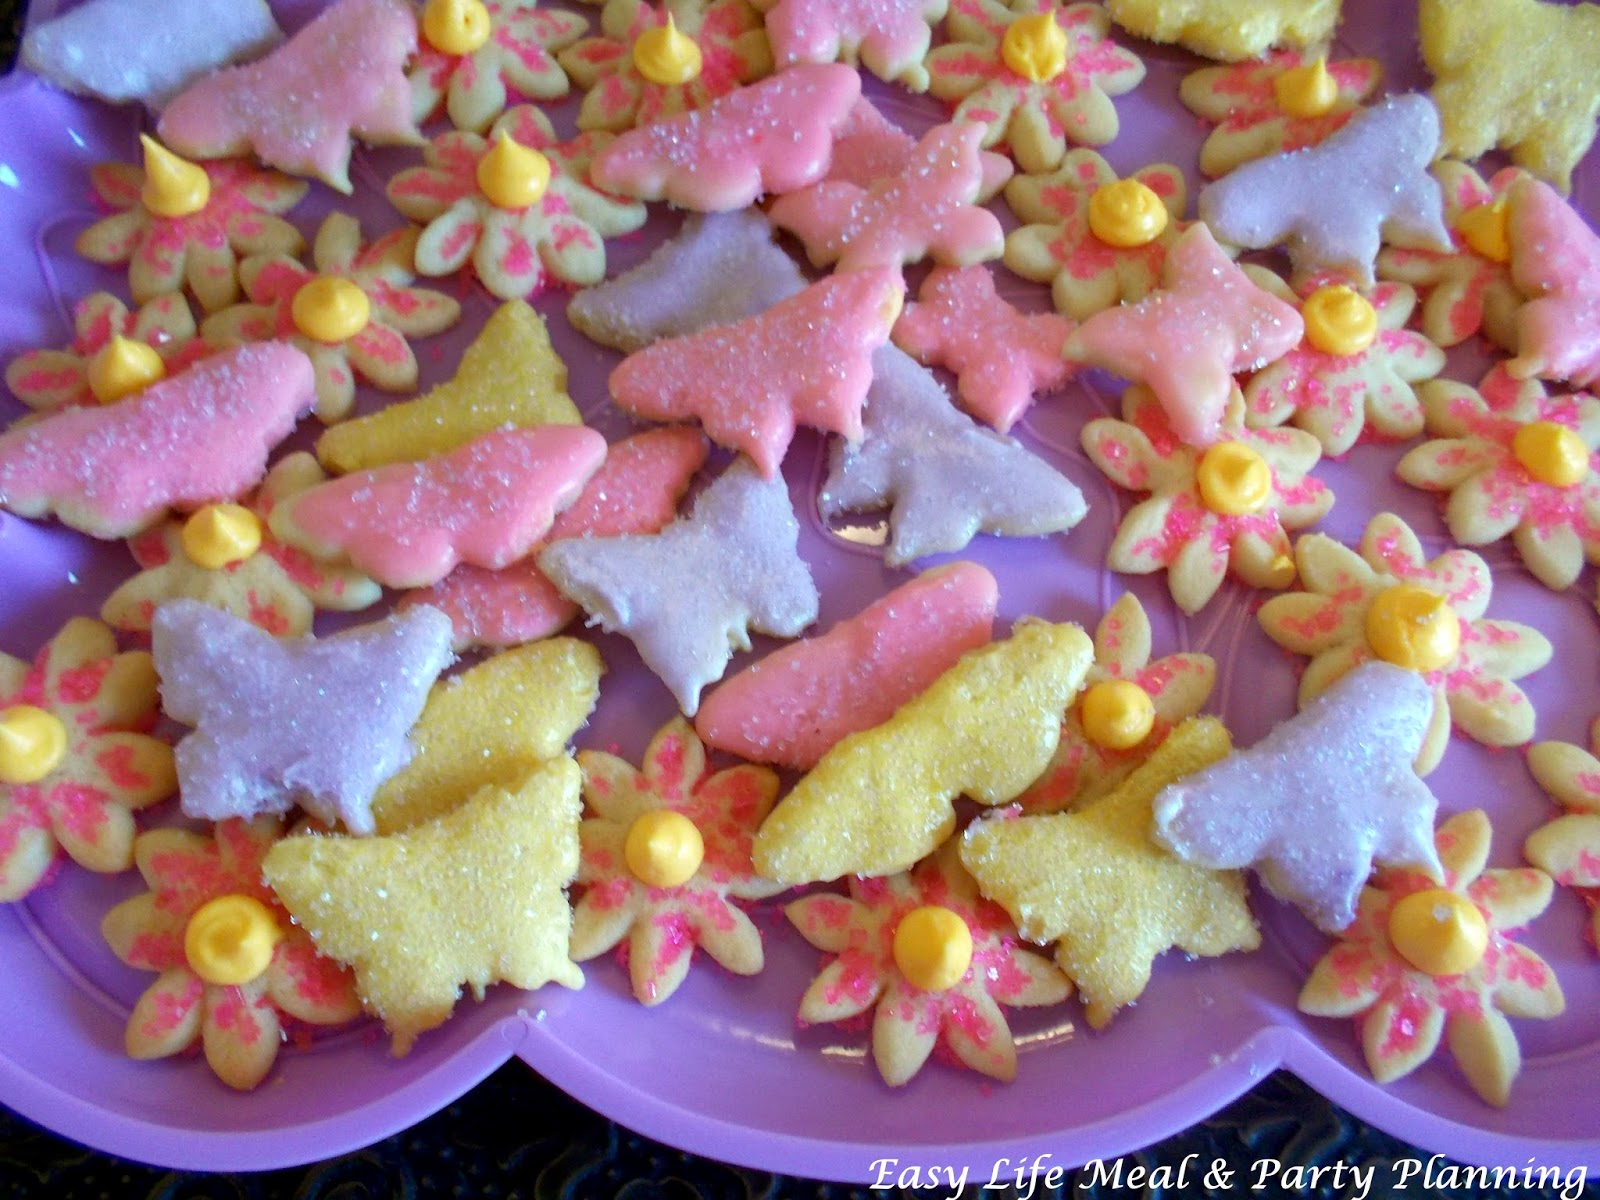 Vanilla sugar Easter Cookies - Easy Life Meal & Party Planning